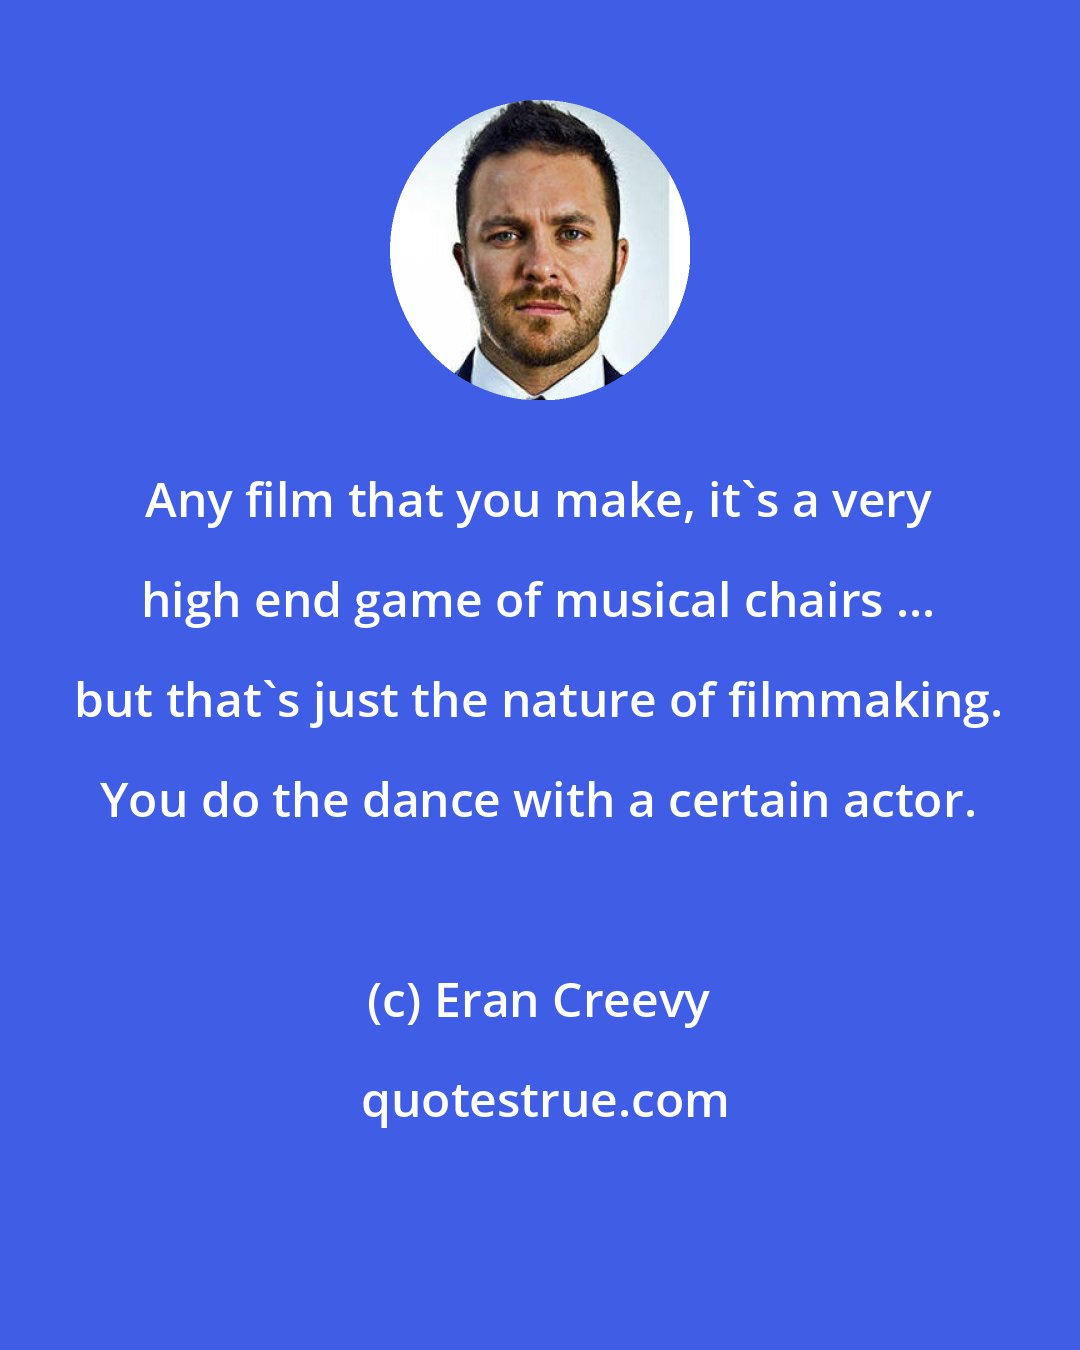 Eran Creevy: Any film that you make, it's a very high end game of musical chairs ... but that's just the nature of filmmaking. You do the dance with a certain actor.